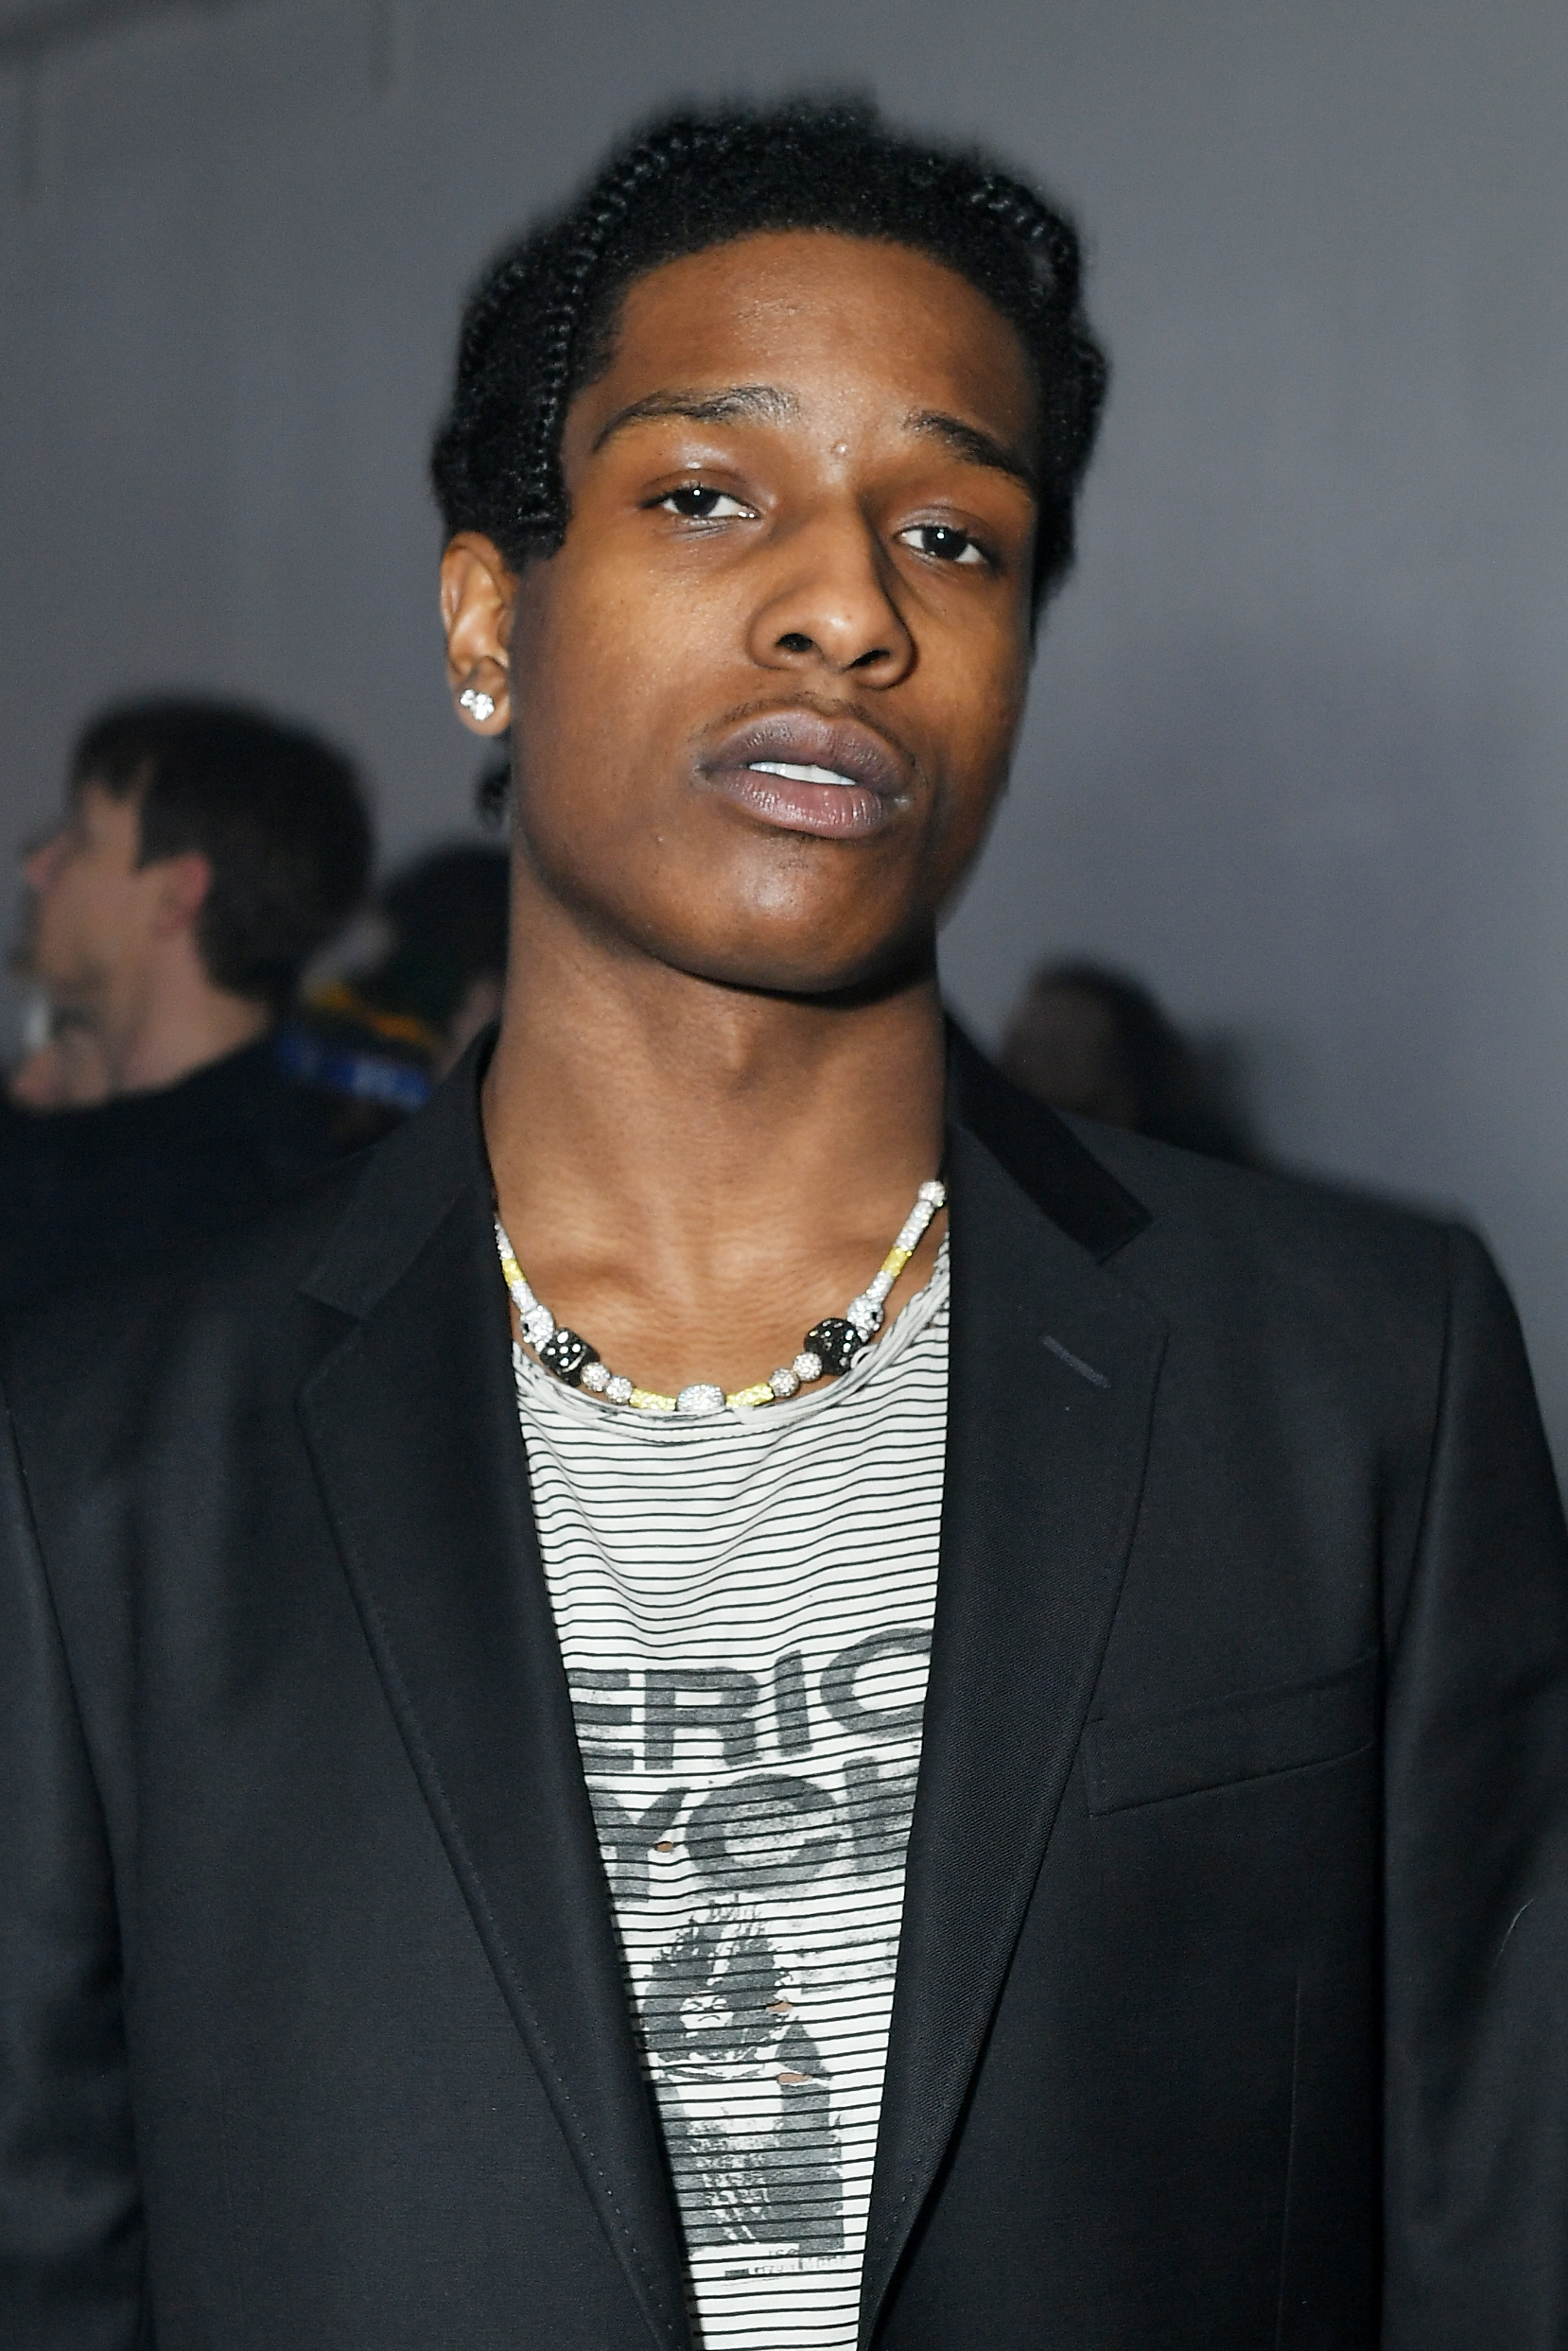 GQ Australia - Even when ASAP Rocky steps out in a simple suit, he knows  how to accessorize like a champ. Get the run down on the rapper's suit/pearls  combo, and the